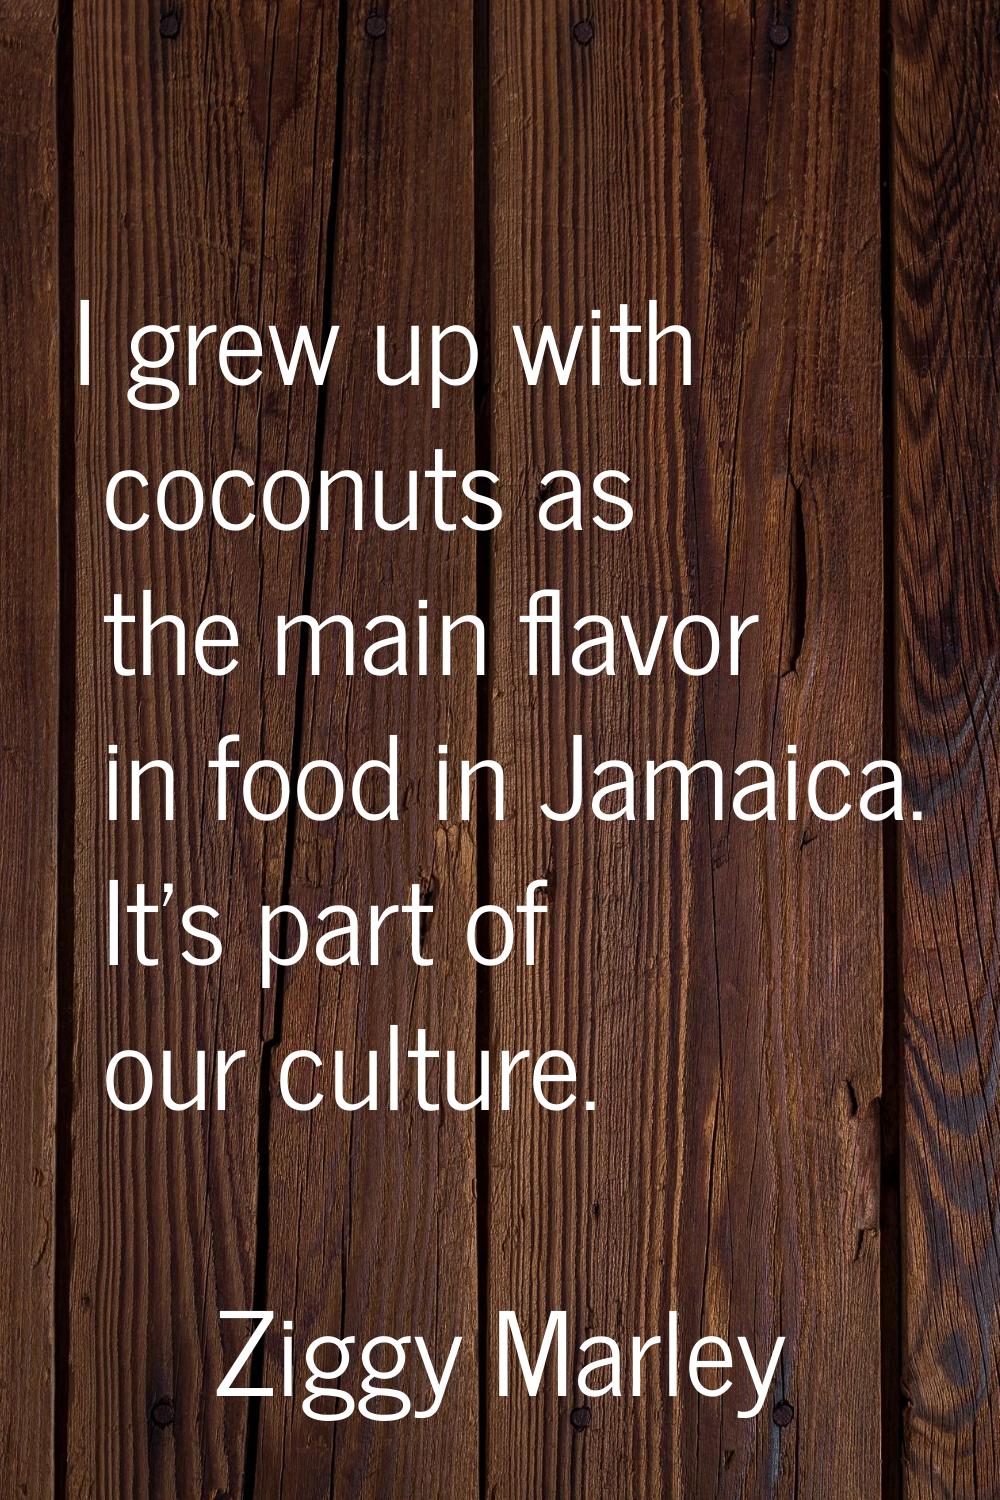 I grew up with coconuts as the main flavor in food in Jamaica. It's part of our culture.